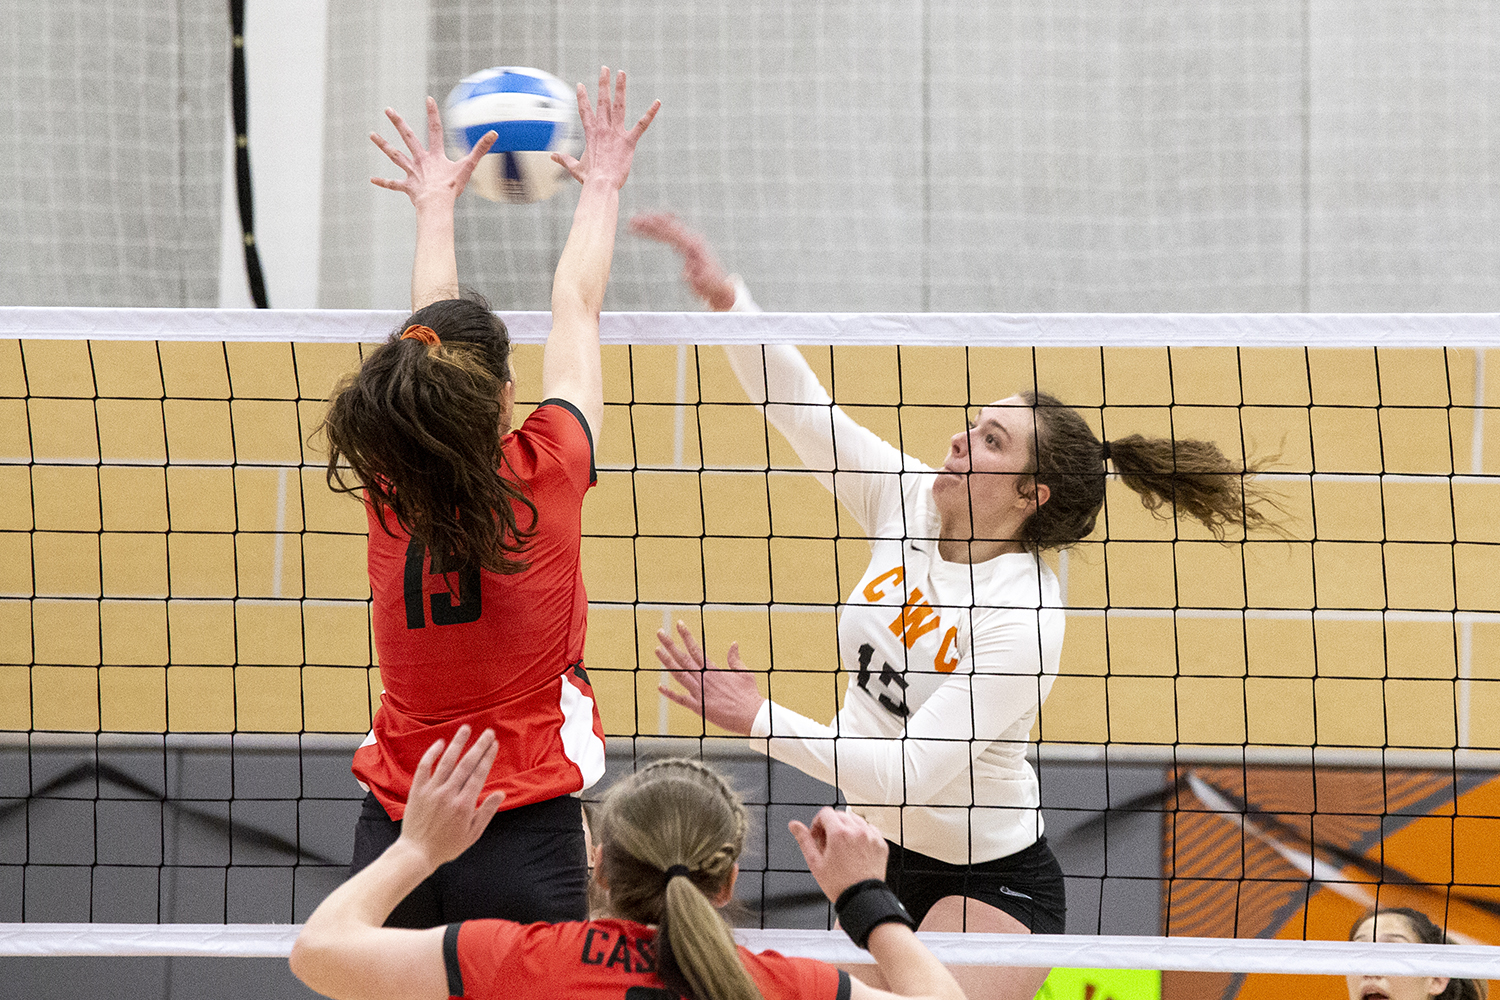 cwc volleyball player spikes the ball over the net